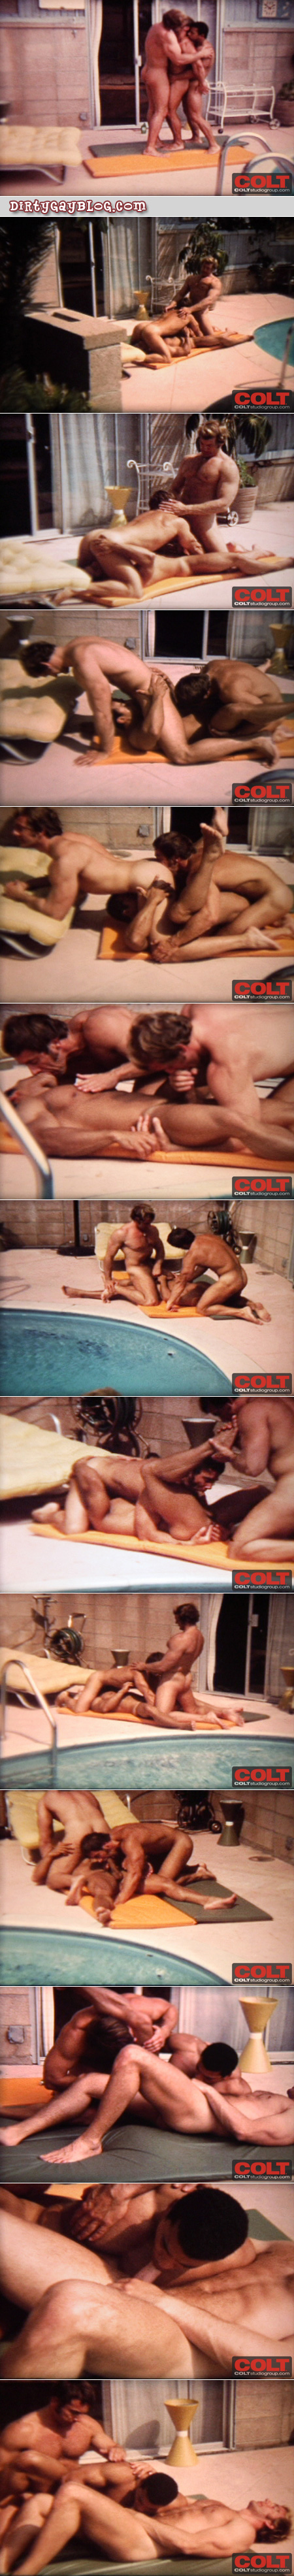 Vintage gay porn poolside group sex with three butch, extremely muscular bodybuilders.